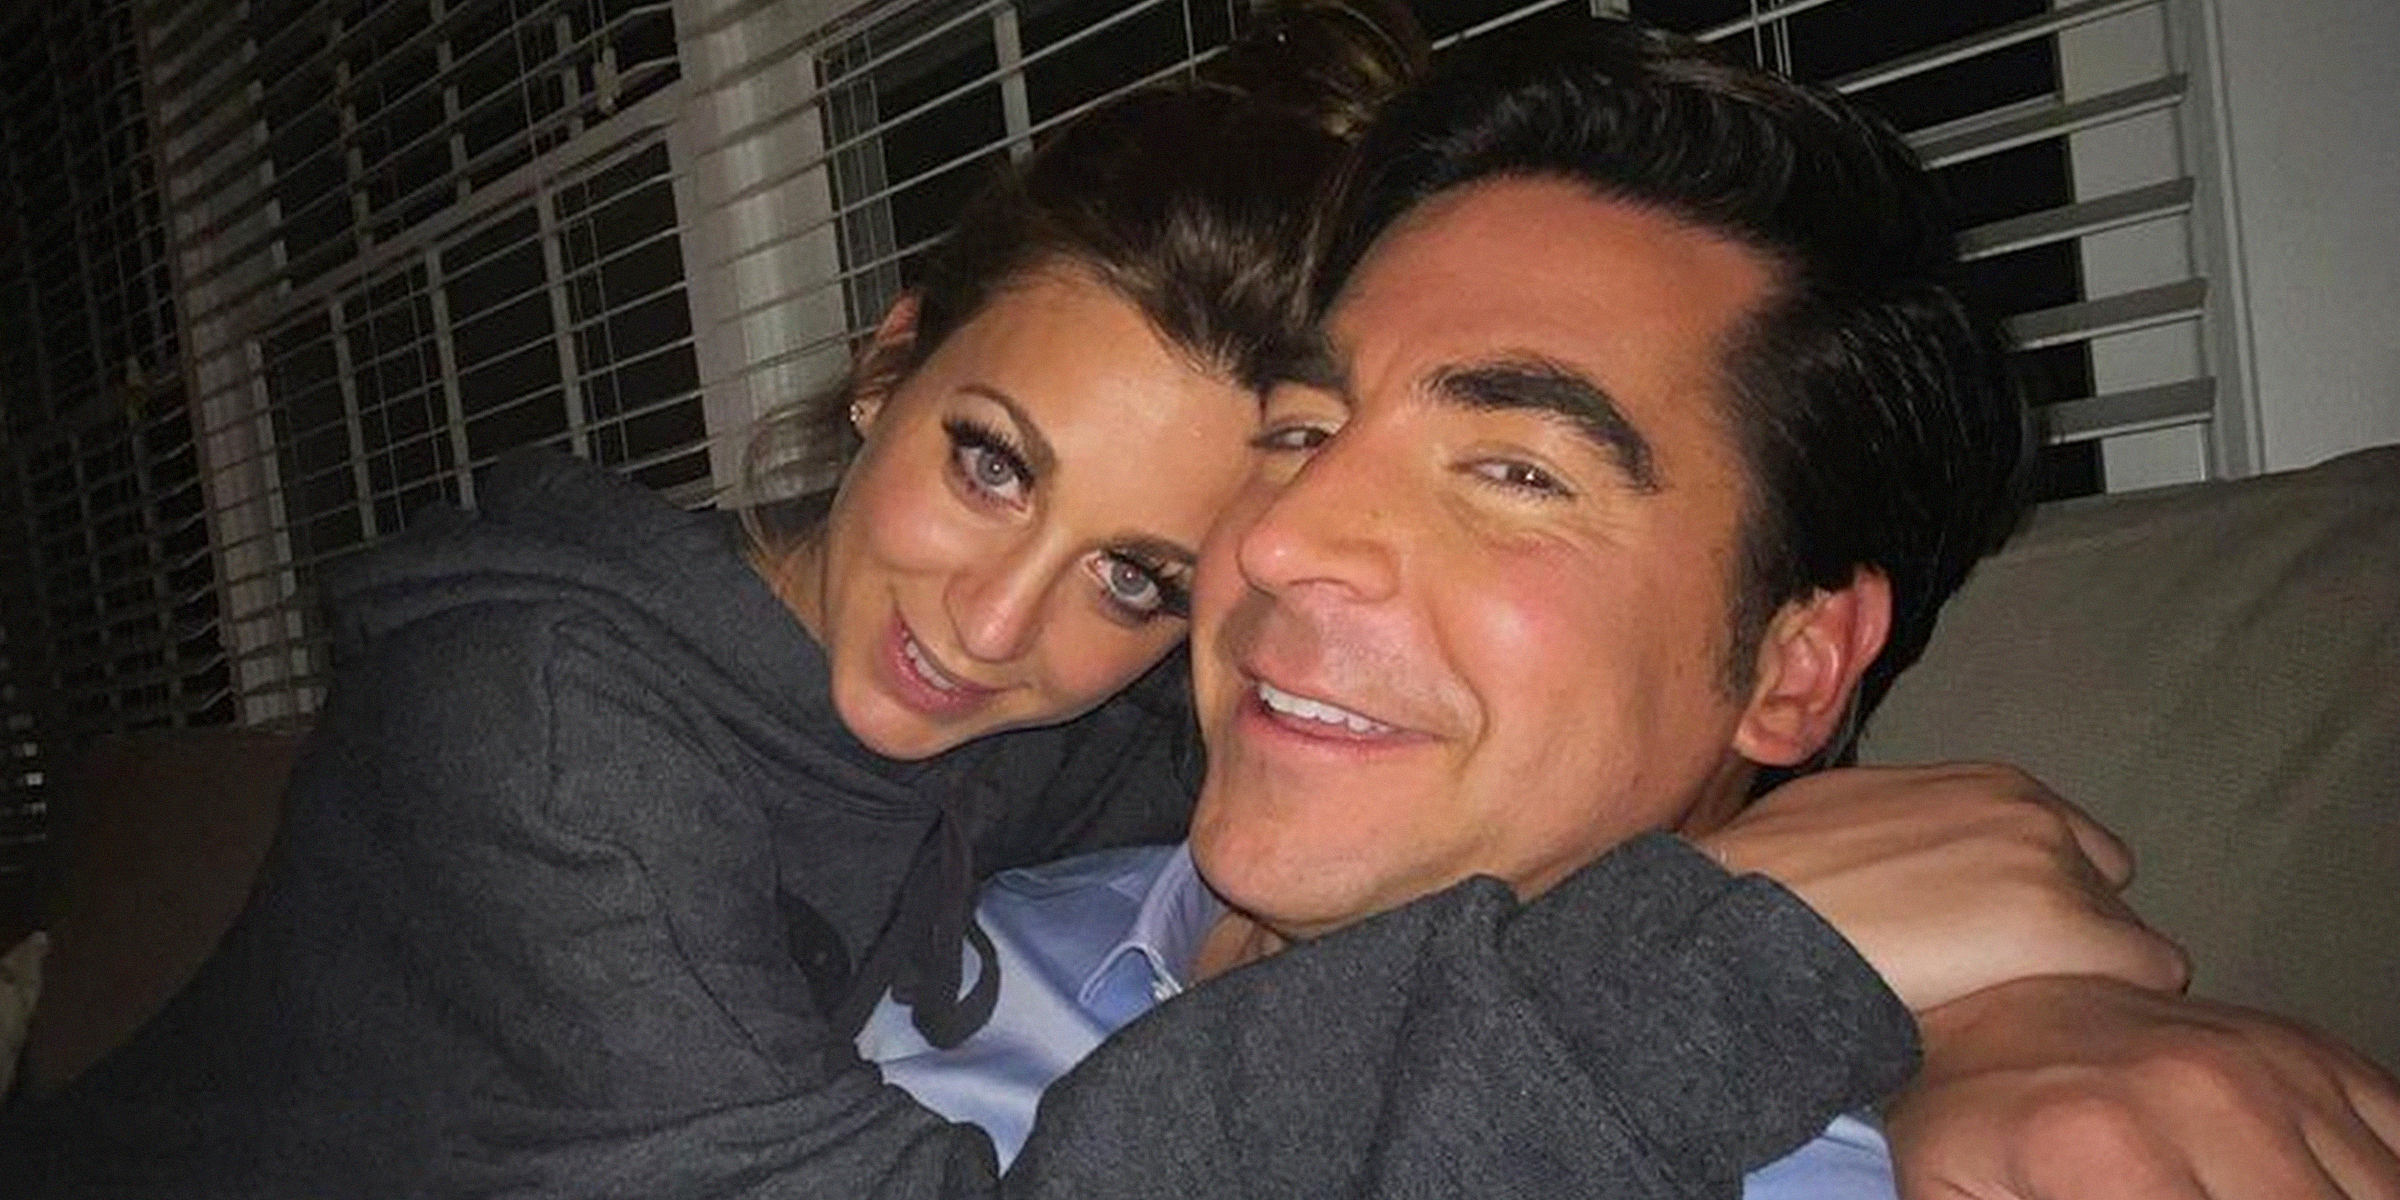 Jesse Watters and his wife Emma | Source: instagram.com/emmawatters